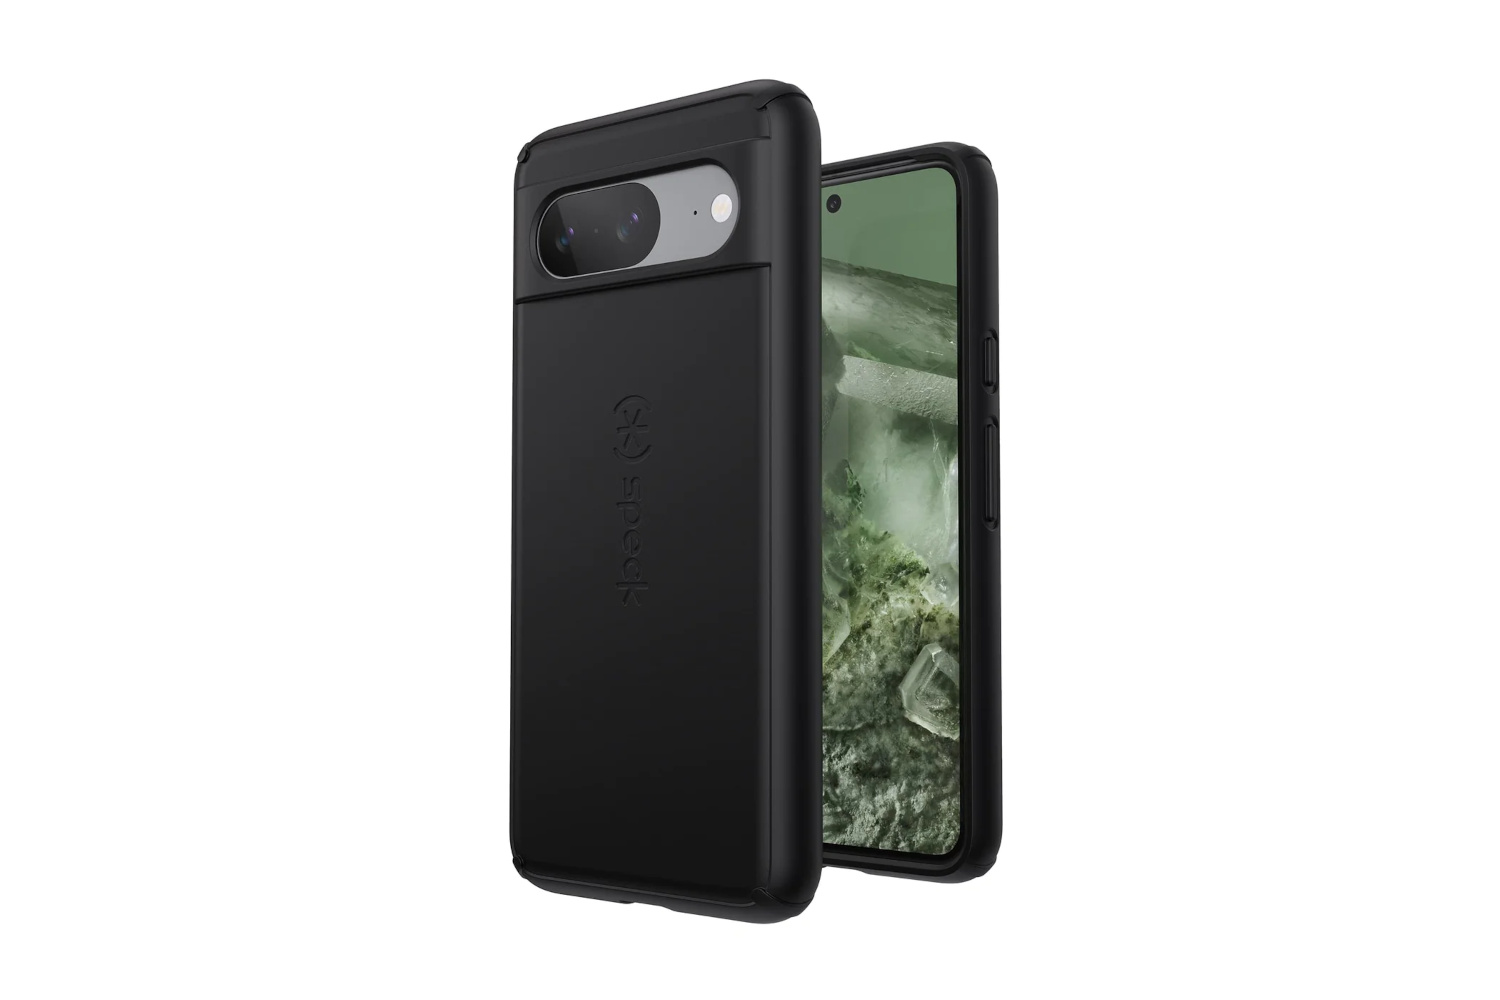 VRS Design-Premium Quality Phone Cases for iPhone, Galaxy and Pixel